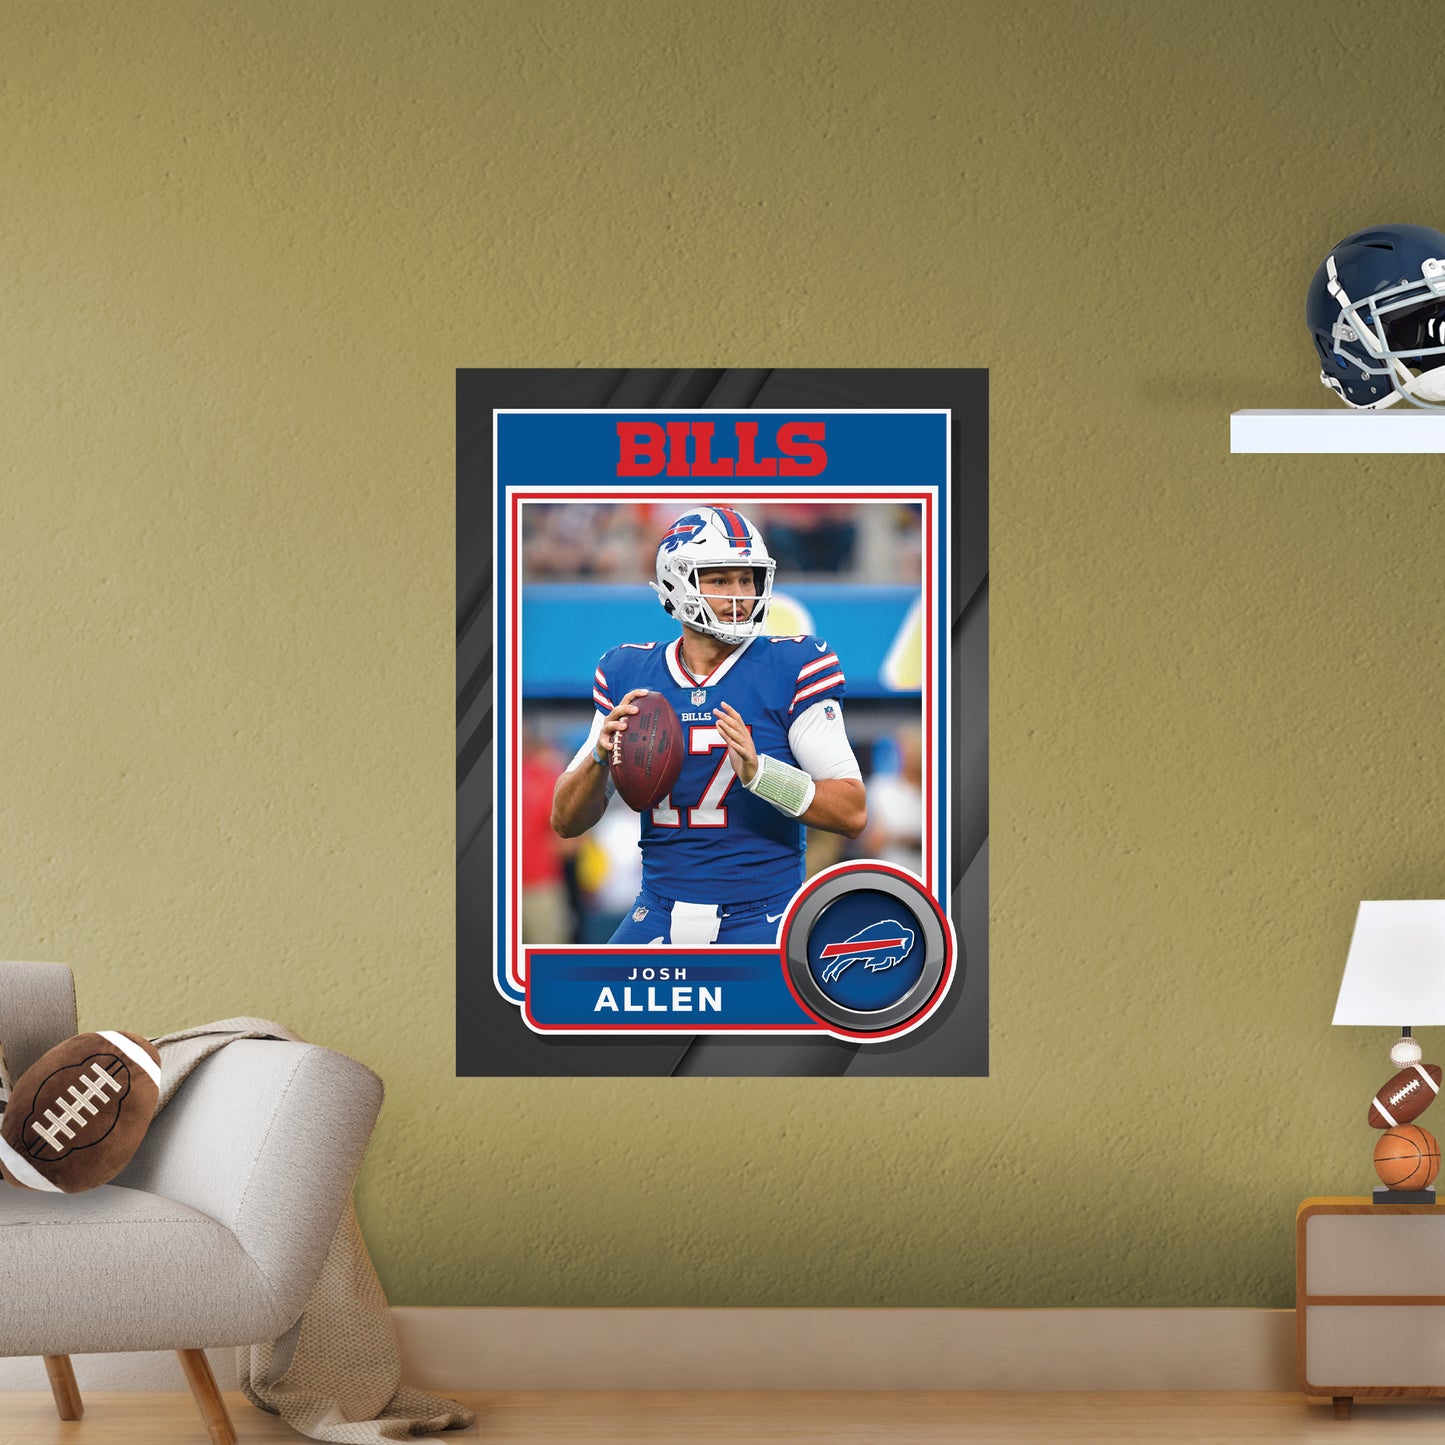 Buffalo Bills: Josh Allen Poster - Officially Licensed NFL Removable Adhesive Decal